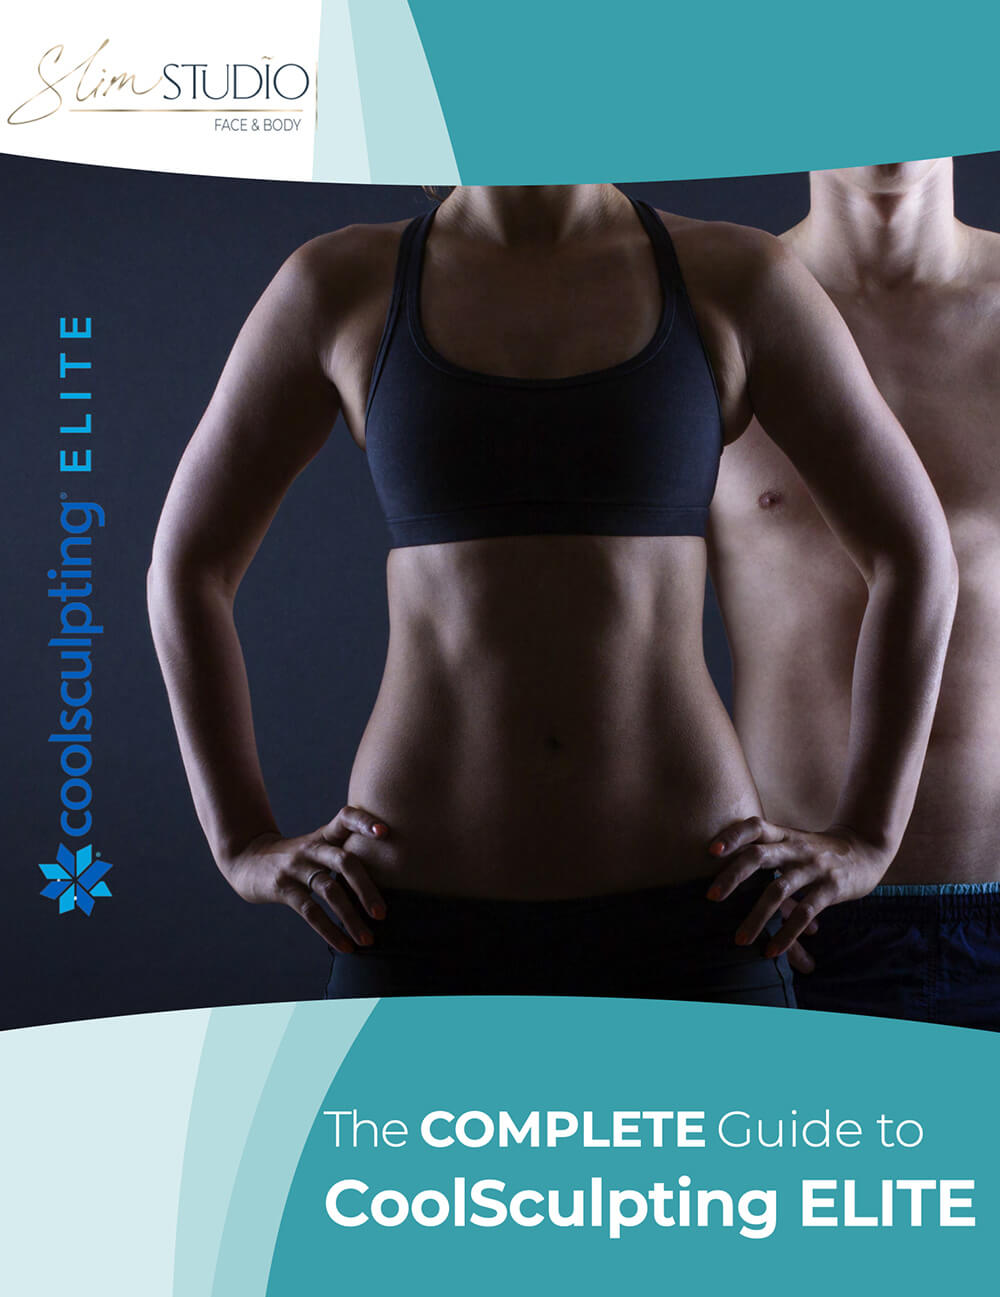 The complete guide to CoolSculpting Infographic